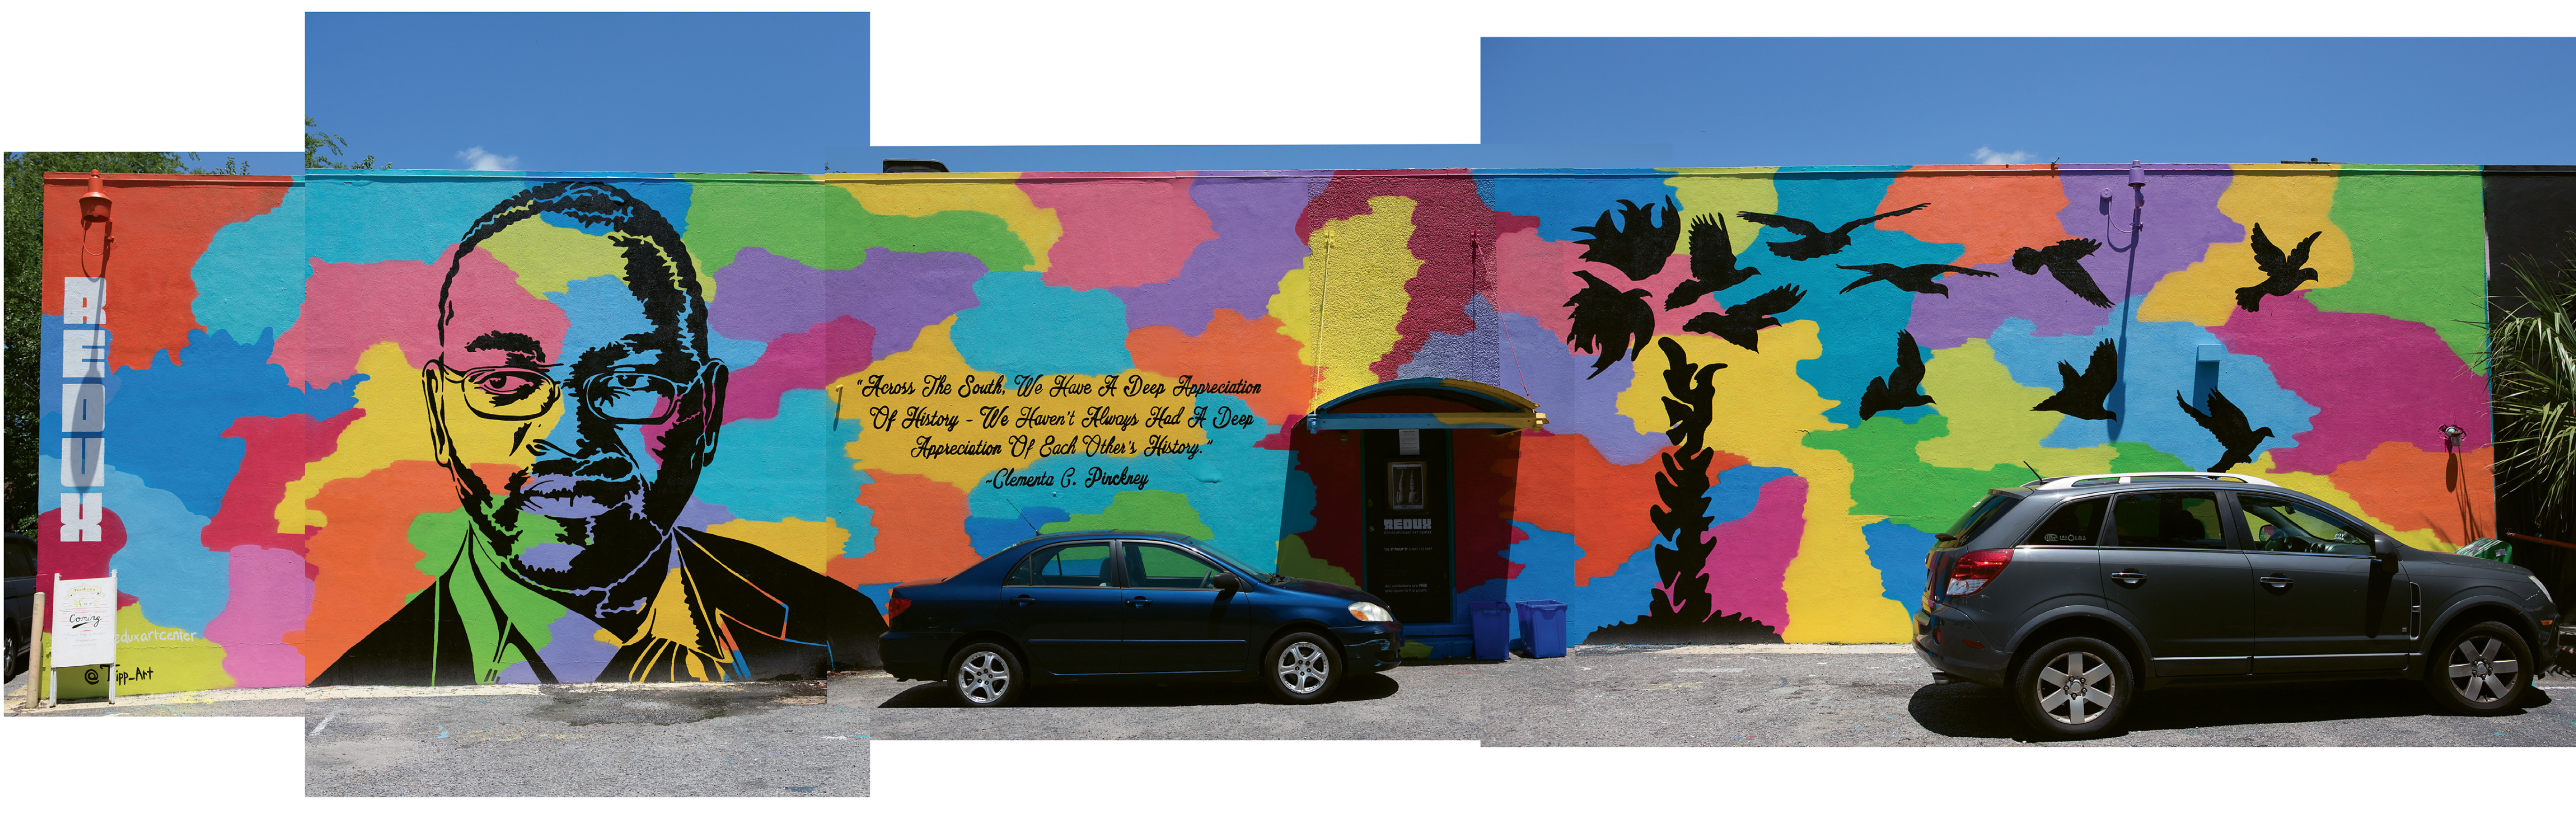 In Remembrance  by Tripp Derrick Barnes  May 2016  Redux Contemporary Art Center (136 St. Philip St.)  Working with a team of artists, the Columbia native painted this mural in his “PopNeoism” style to honor the Rev. Clementa Pinckney and the Emanuel AME church parishioners killed during Bible study on June 17, 2015.